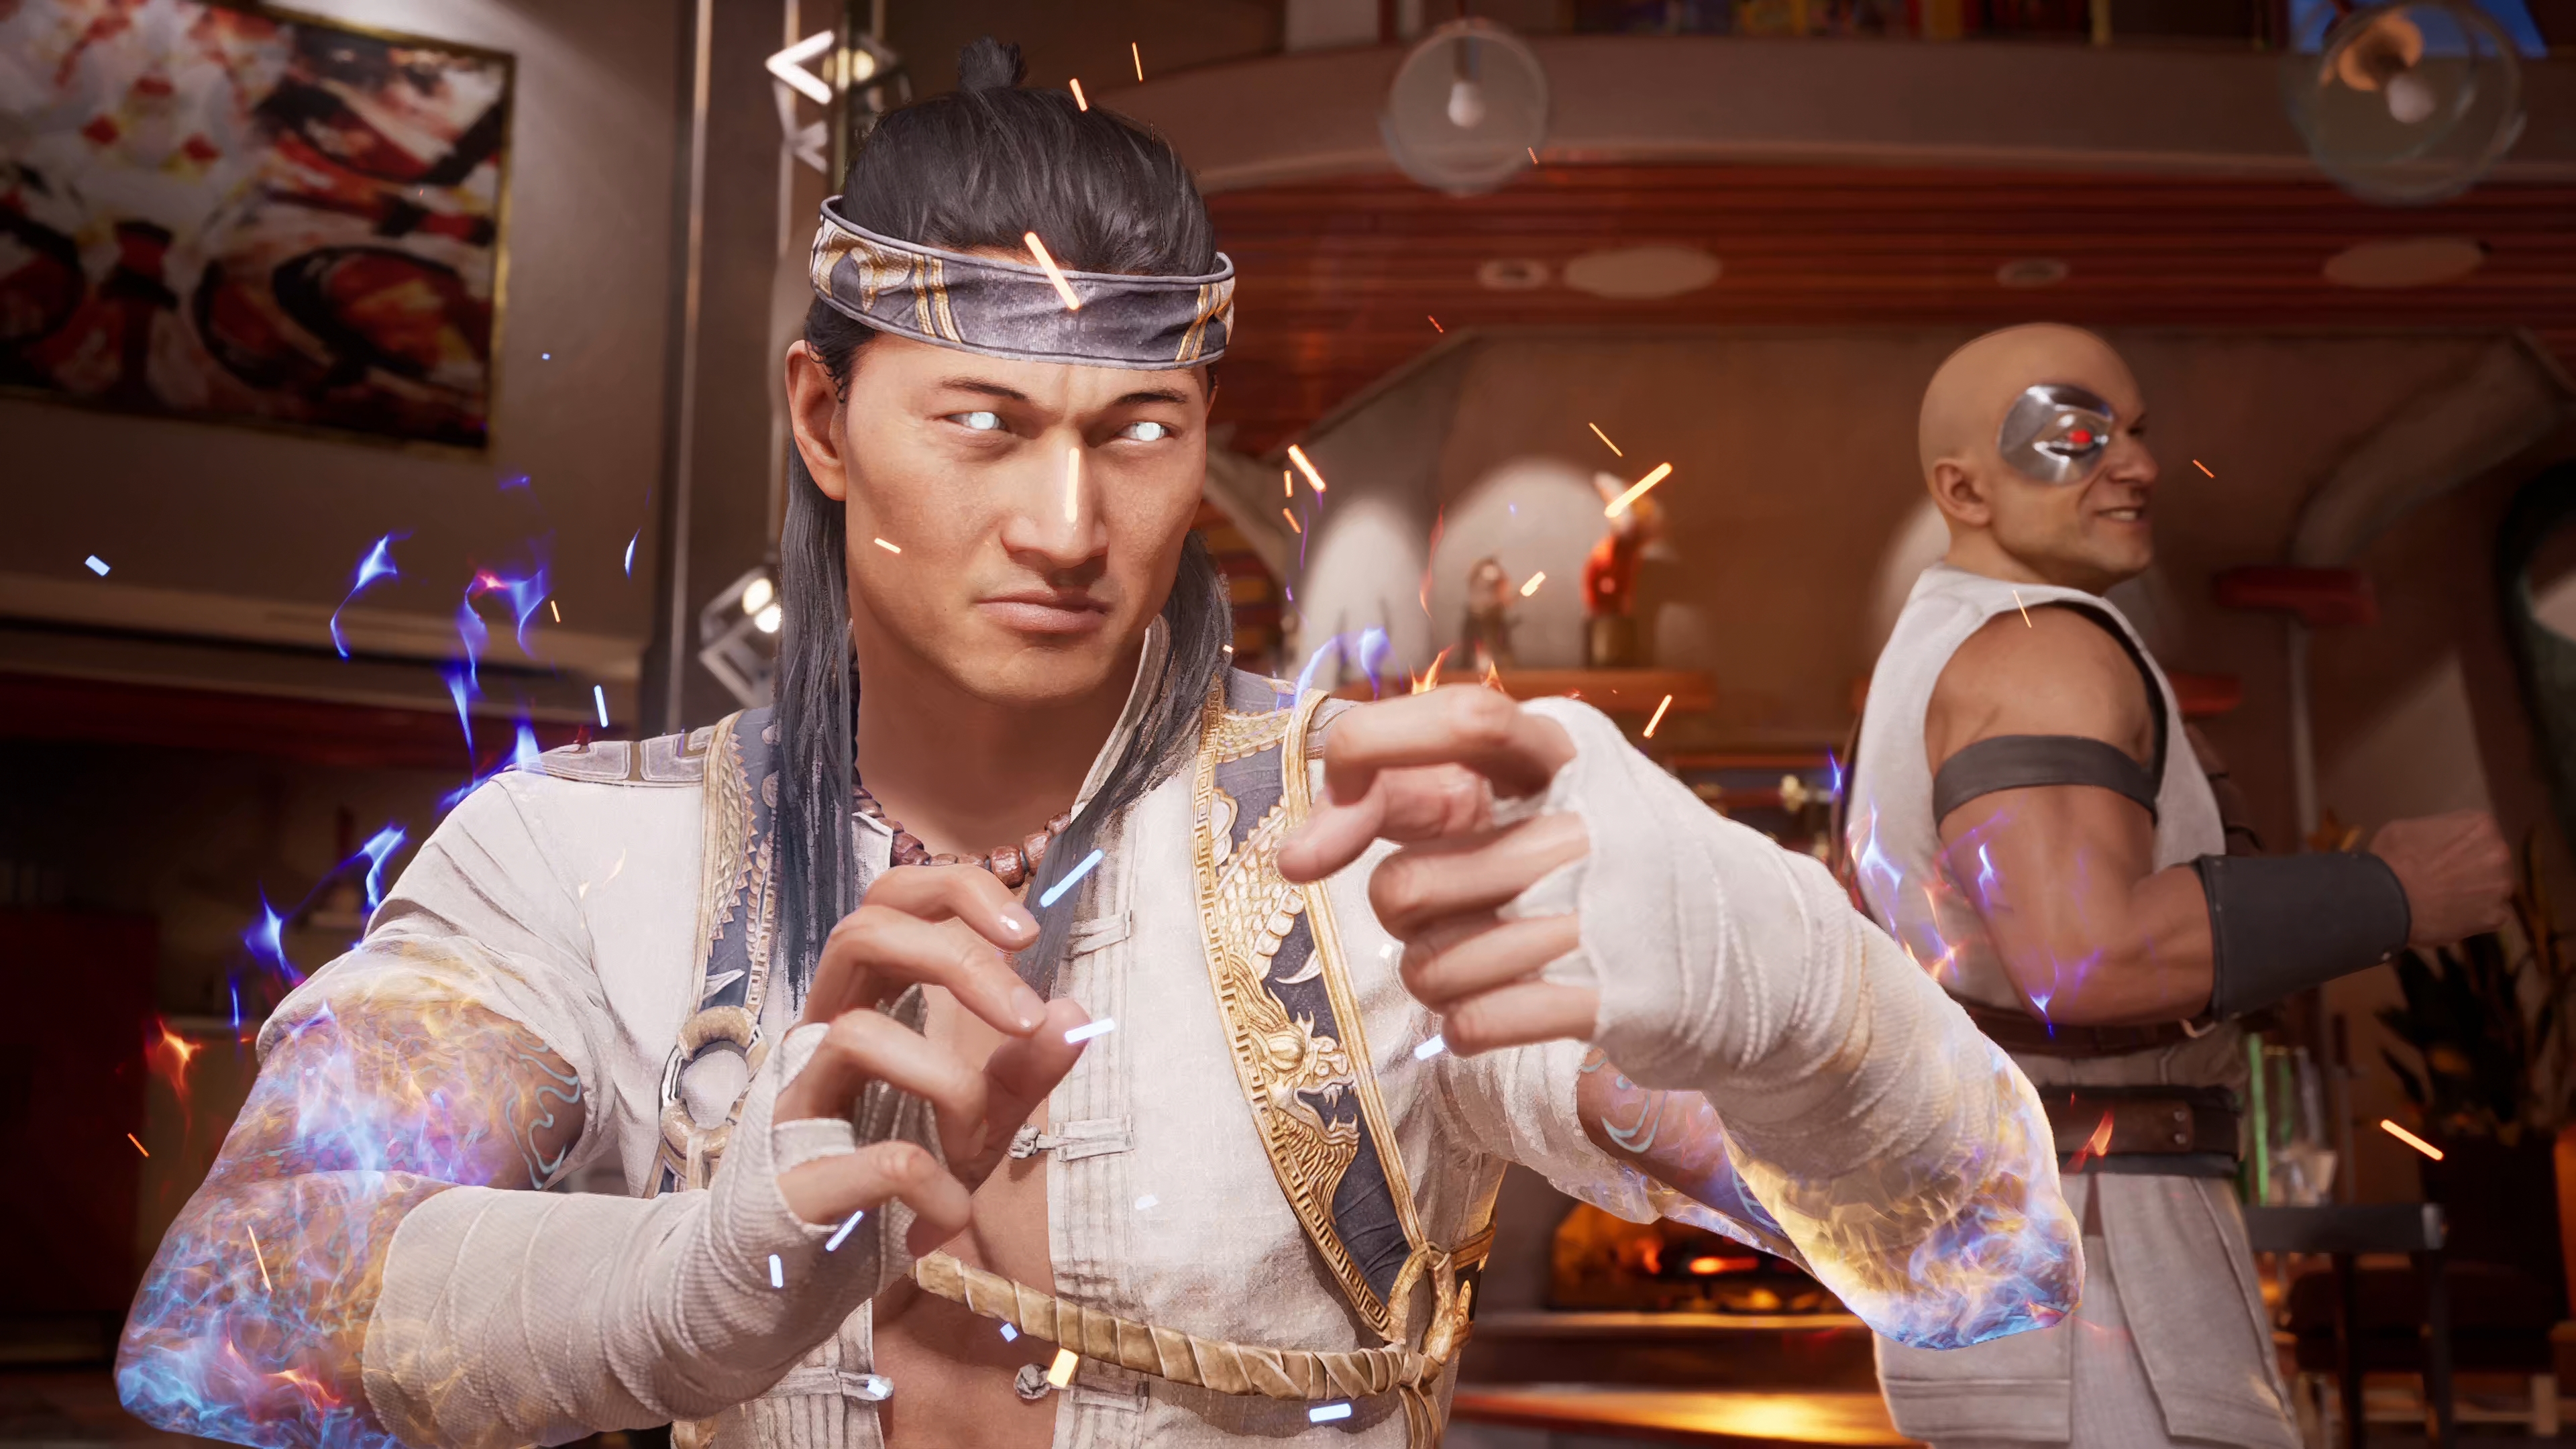 Mortal Kombat 11 Crossplay Will Be Coming Soon To PlayStation 4 And Xbox  One - LADbible